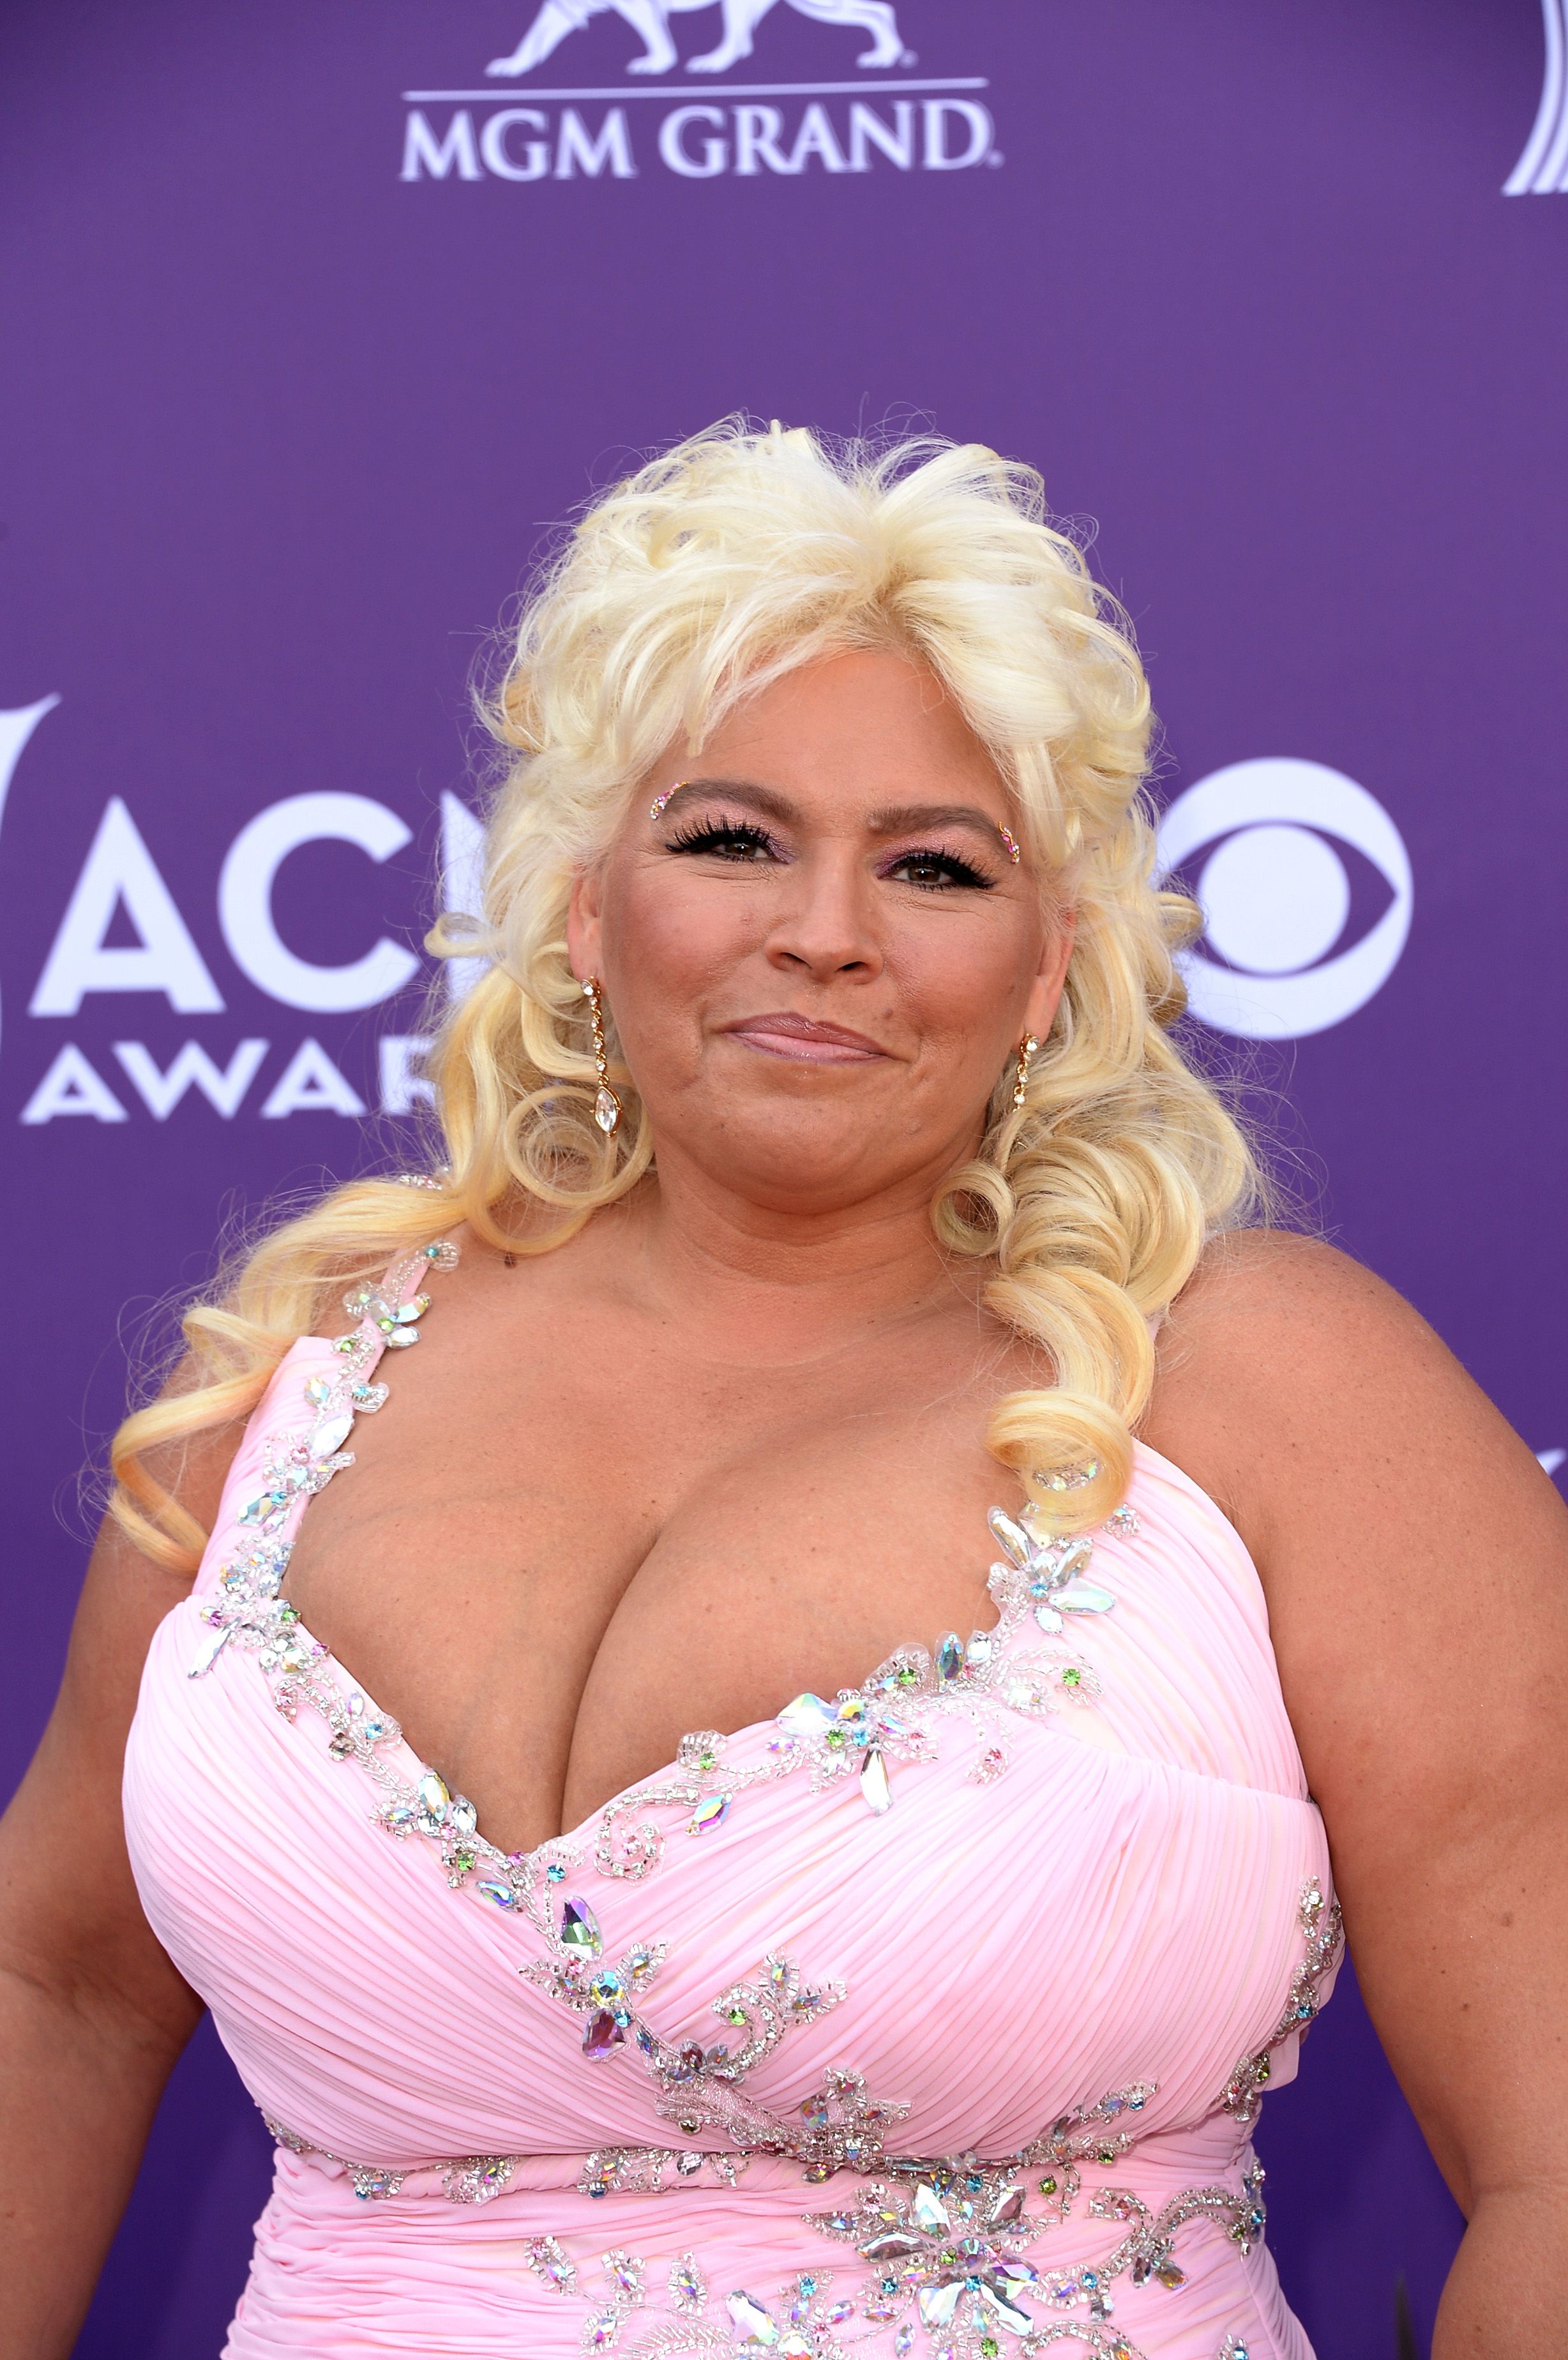 Beth Chapman's Death Prompts Reactions From Celebs, Fans Online